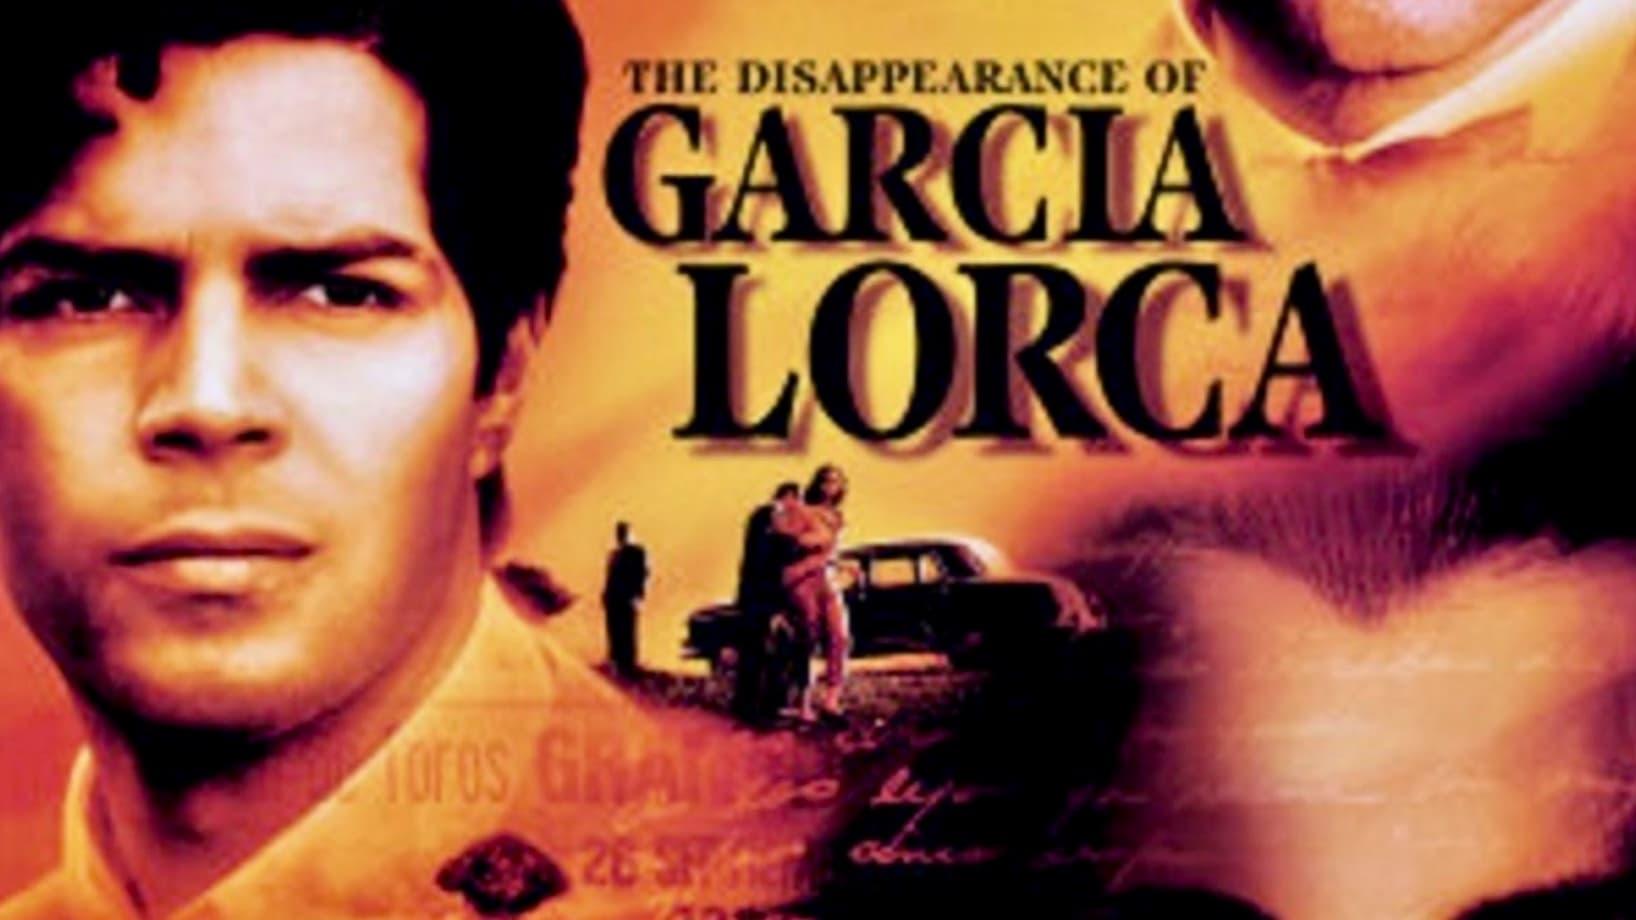 The Disappearance of Garcia Lorca backdrop